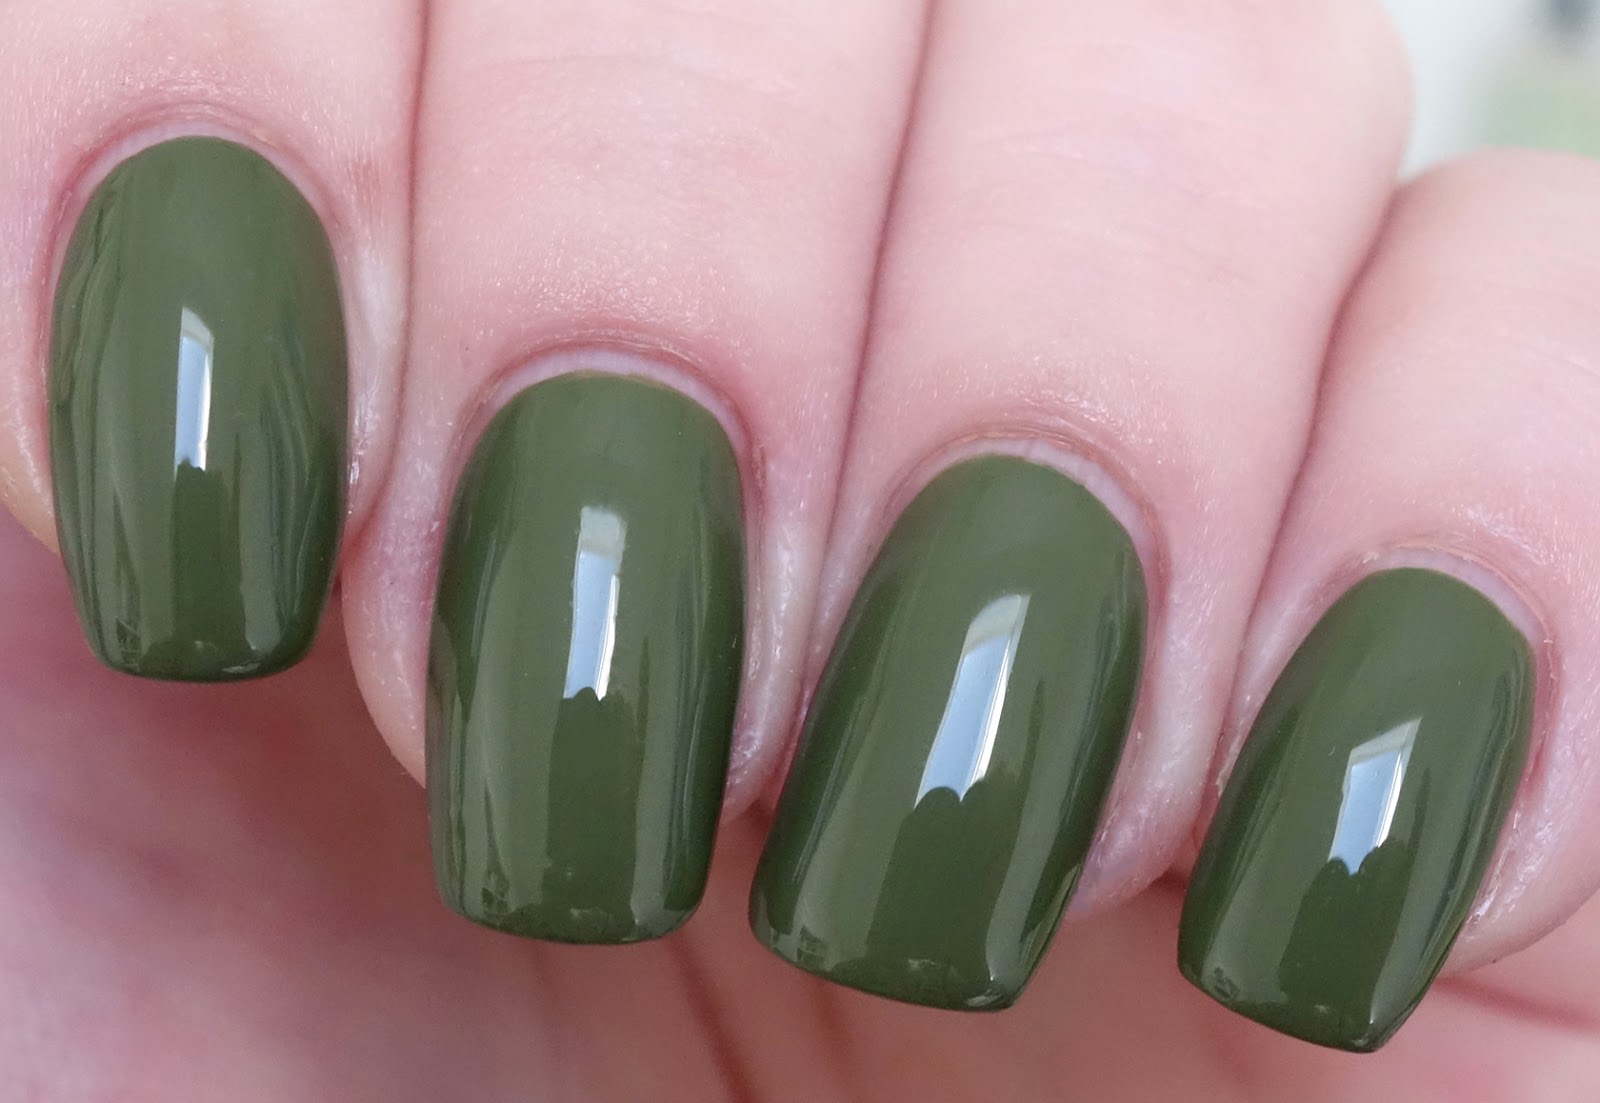 2. "Olive for Green" by OPI - wide 3